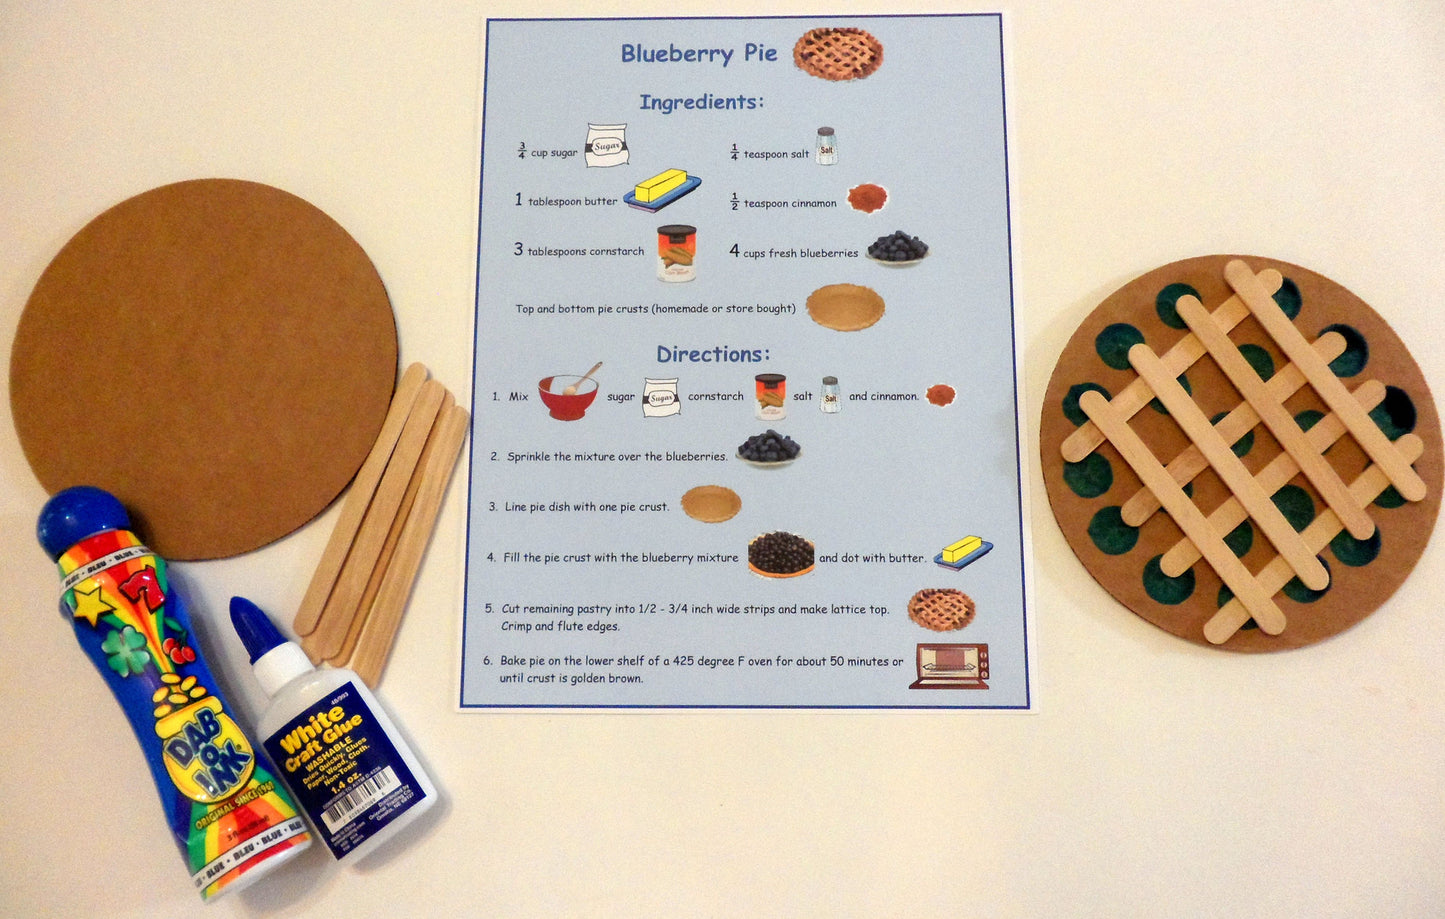 Blueberry pie art - Blueberries For Sal by Robert McCloskey - Ivy Kids subscription box activities.